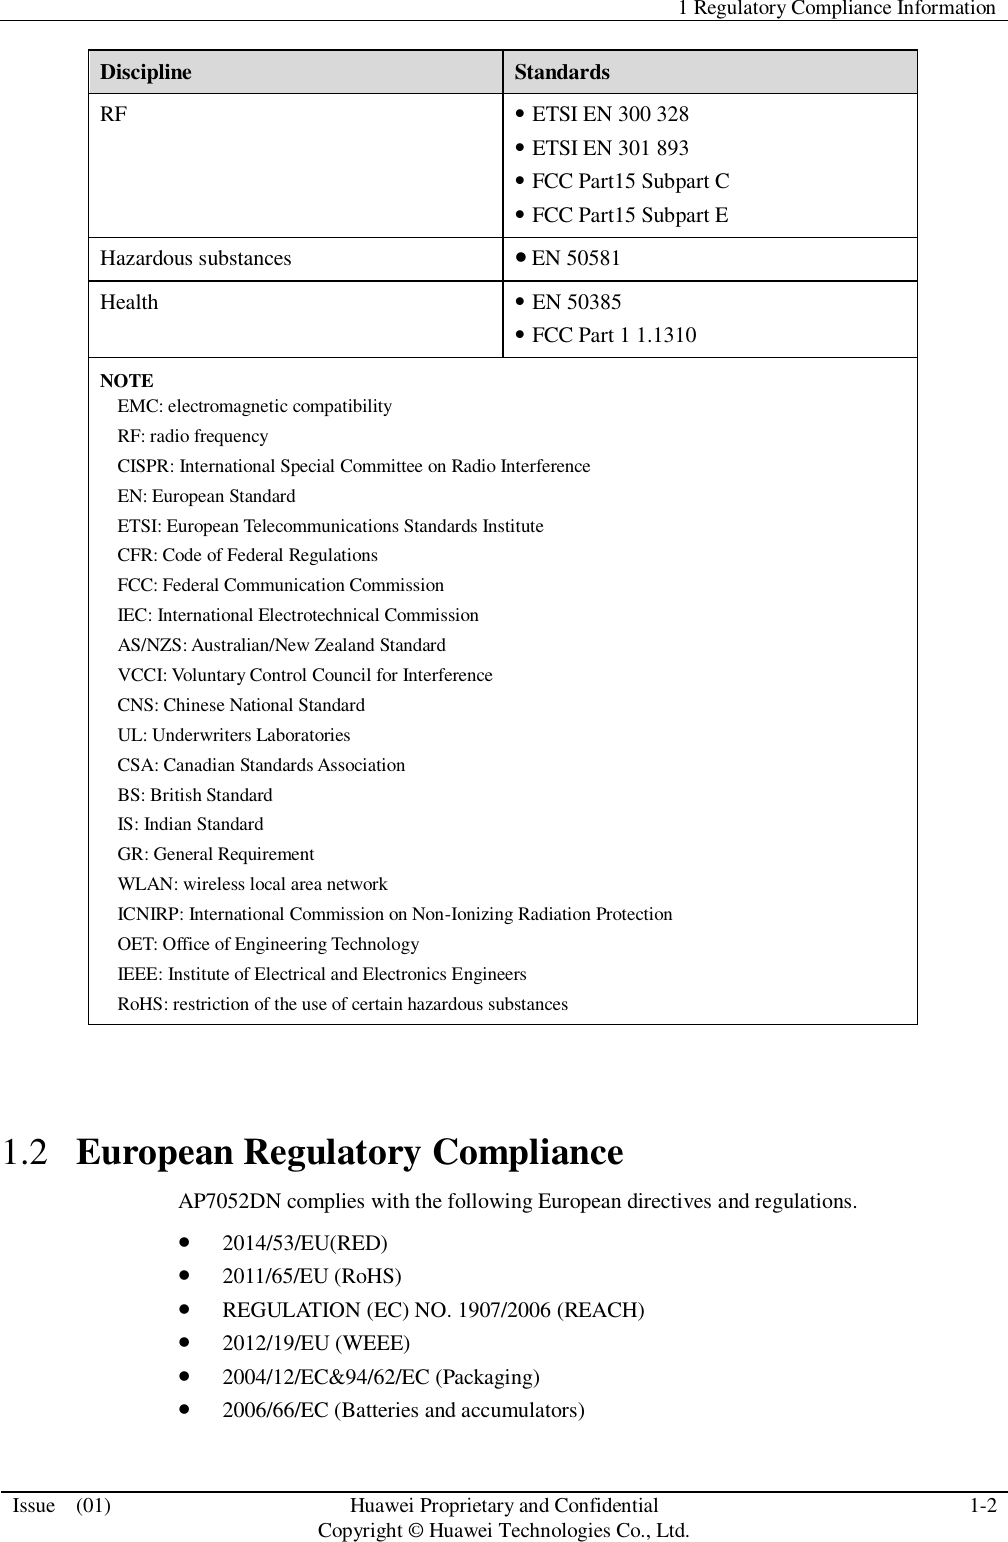   1 Regulatory Compliance Information  Issue    (01) Huawei Proprietary and Confidential                                     Copyright © Huawei Technologies Co., Ltd. 1-2  Discipline Standards RF  ETSI EN 300 328    ETSI EN 301 893  FCC Part15 Subpart C  FCC Part15 Subpart E Hazardous substances  EN 50581 Health  EN 50385  FCC Part 1 1.1310 NOTE EMC: electromagnetic compatibility RF: radio frequency CISPR: International Special Committee on Radio Interference EN: European Standard ETSI: European Telecommunications Standards Institute CFR: Code of Federal Regulations FCC: Federal Communication Commission IEC: International Electrotechnical Commission AS/NZS: Australian/New Zealand Standard VCCI: Voluntary Control Council for Interference CNS: Chinese National Standard UL: Underwriters Laboratories CSA: Canadian Standards Association BS: British Standard IS: Indian Standard GR: General Requirement WLAN: wireless local area network ICNIRP: International Commission on Non-Ionizing Radiation Protection OET: Office of Engineering Technology IEEE: Institute of Electrical and Electronics Engineers RoHS: restriction of the use of certain hazardous substances  1.2   European Regulatory Compliance AP7052DN complies with the following European directives and regulations.  2014/53/EU(RED)  2011/65/EU (RoHS)  REGULATION (EC) NO. 1907/2006 (REACH)  2012/19/EU (WEEE)  2004/12/EC&amp;94/62/EC (Packaging)  2006/66/EC (Batteries and accumulators) 